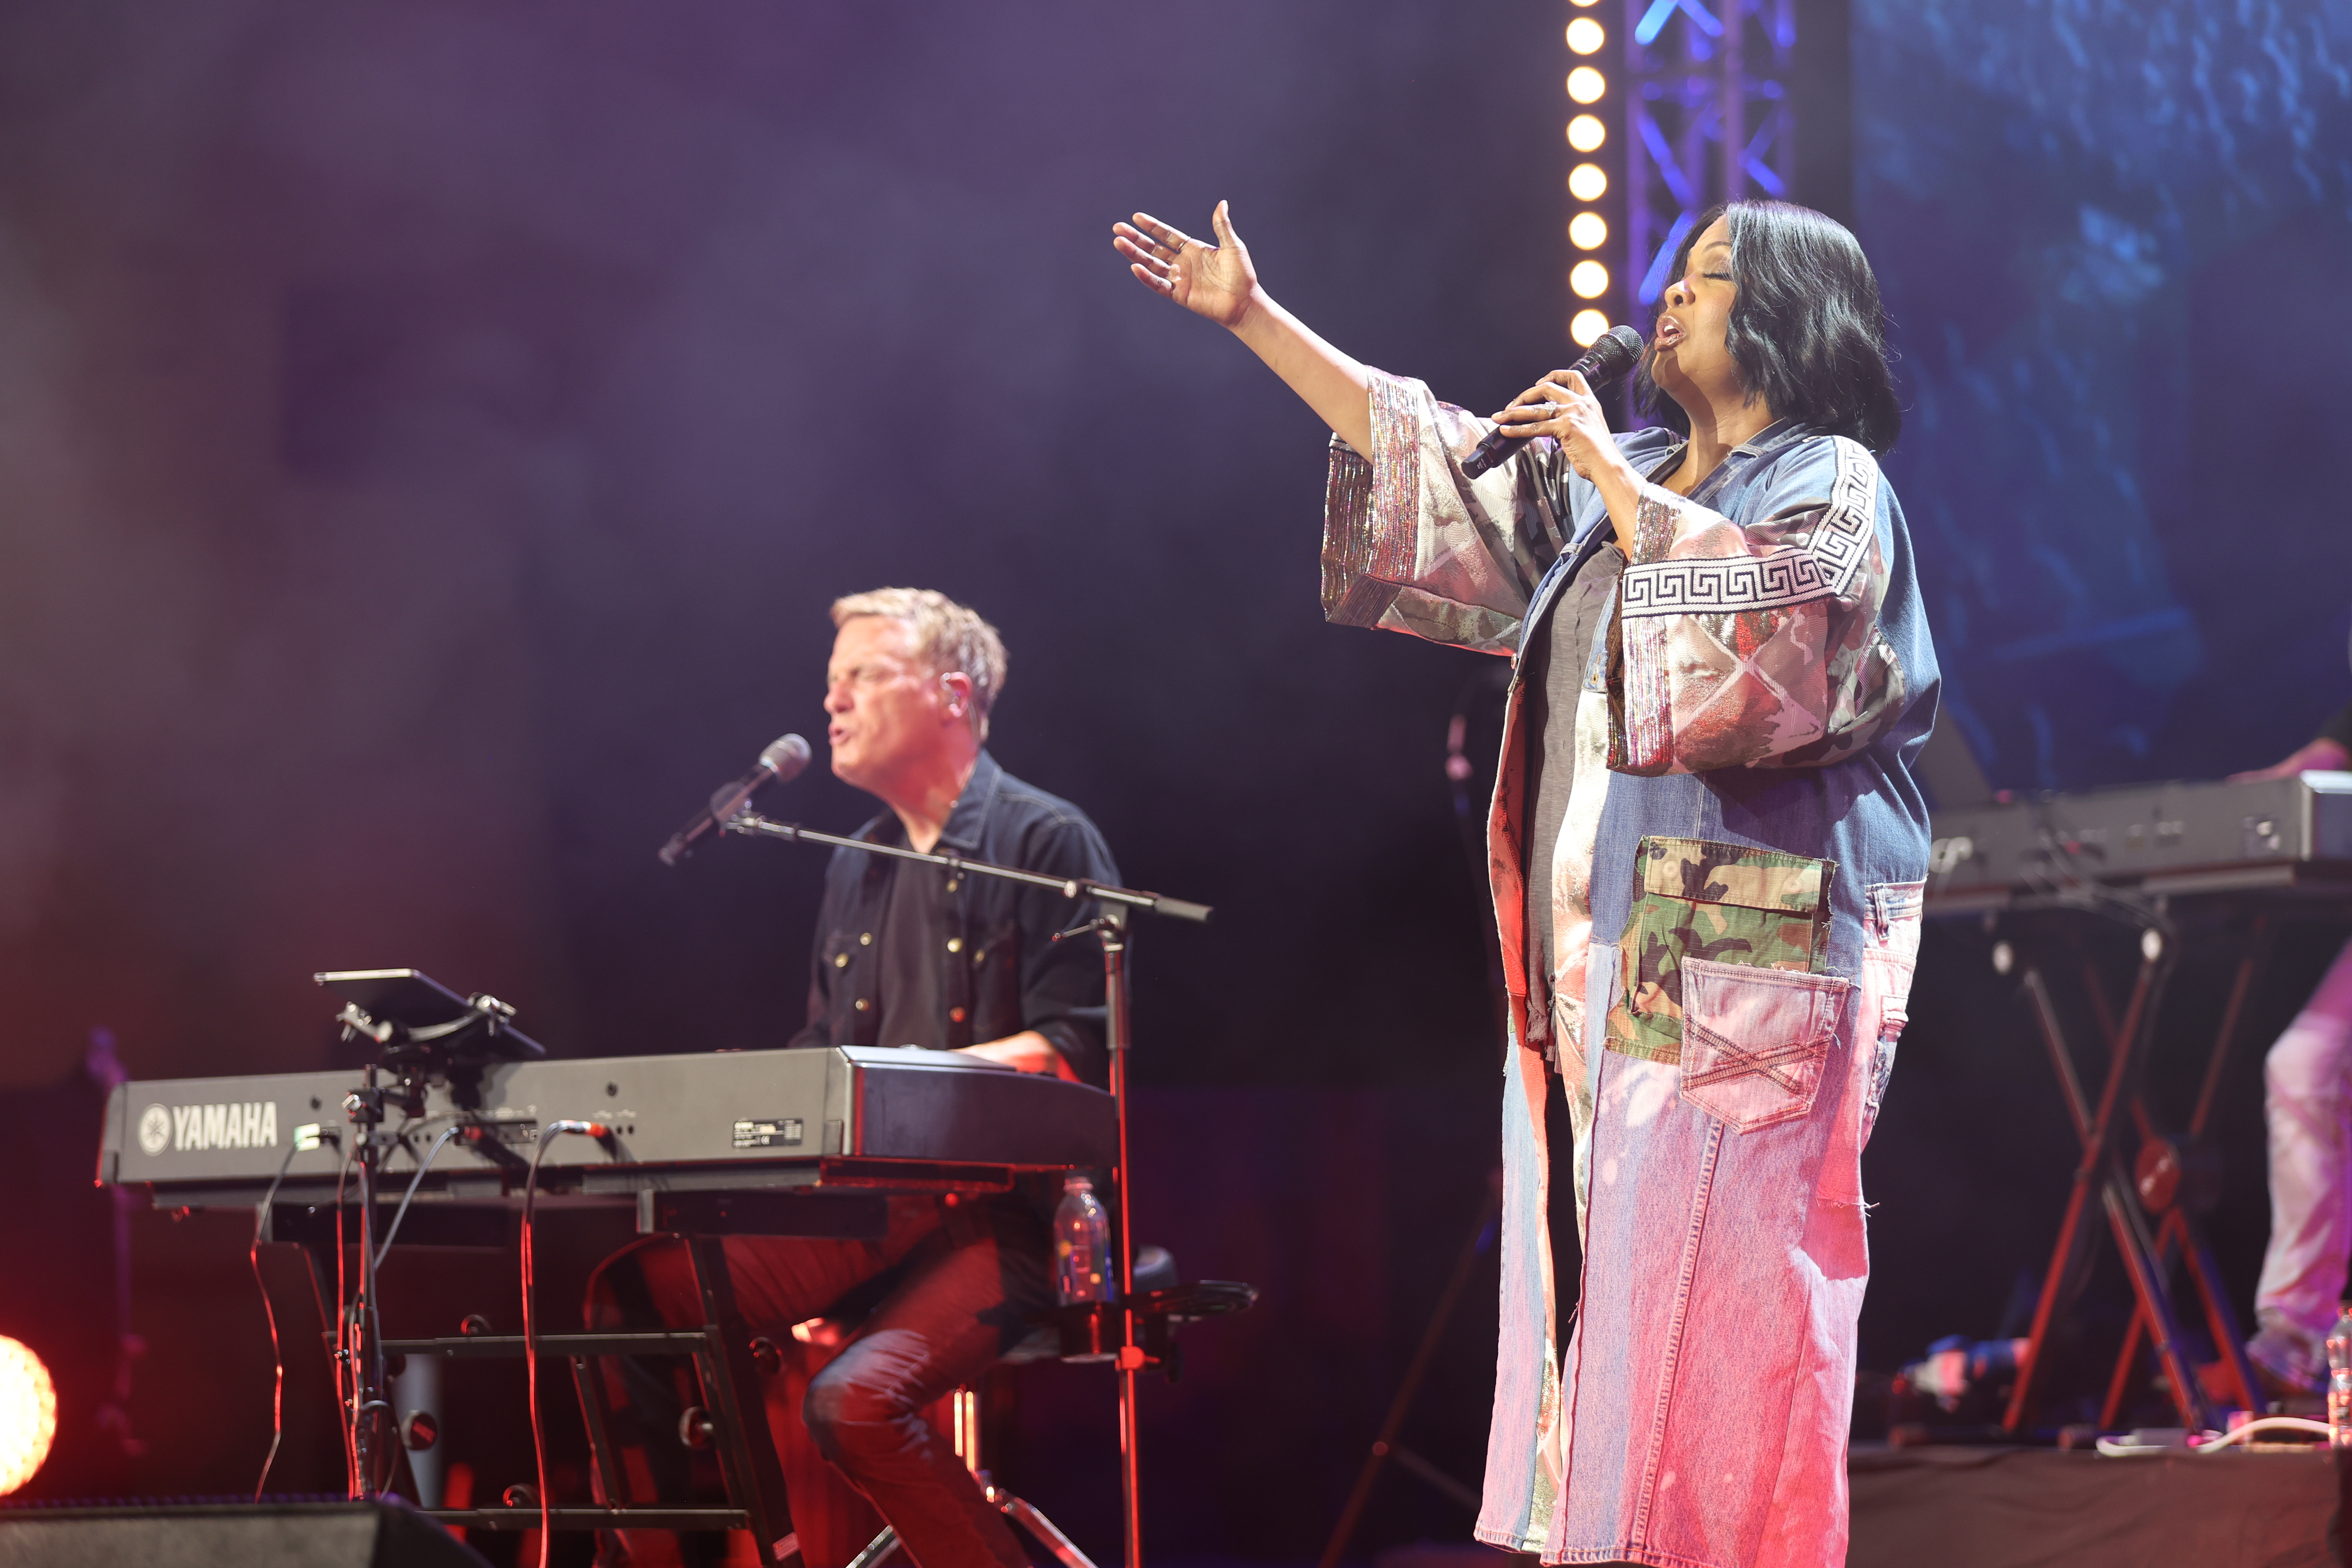 Cece Winans and Michael W Smith / Photo Credit: Mark Barber